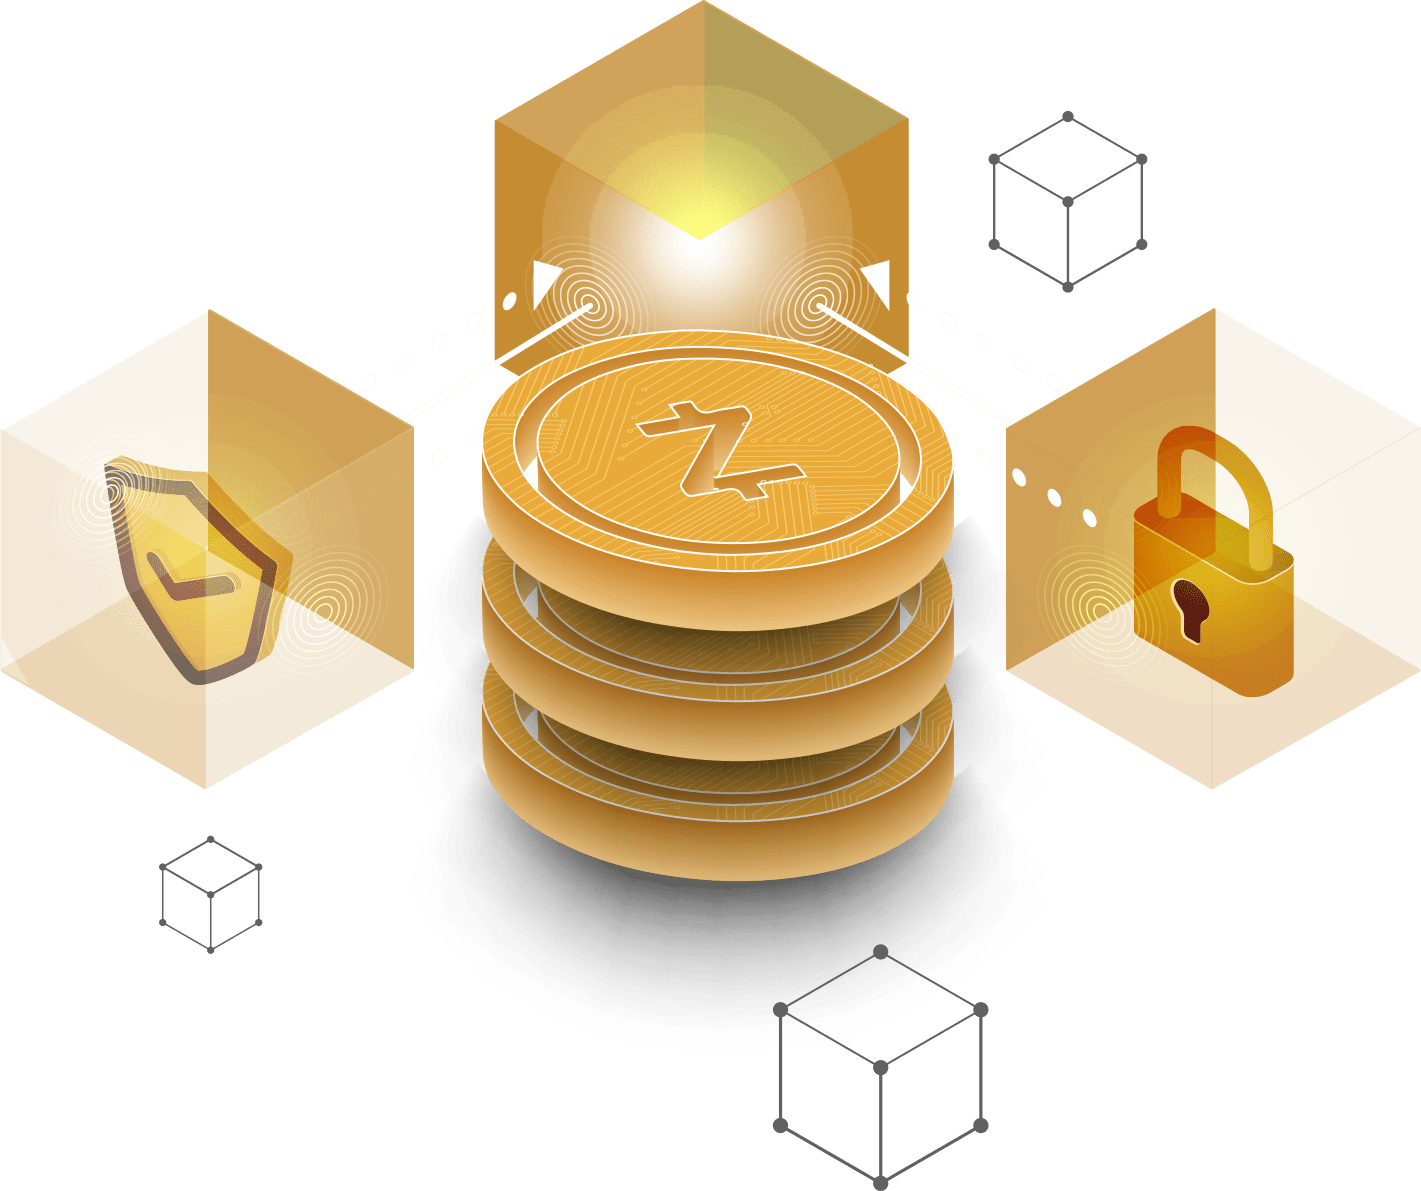 An illustration representing the ZCash Ecosystem